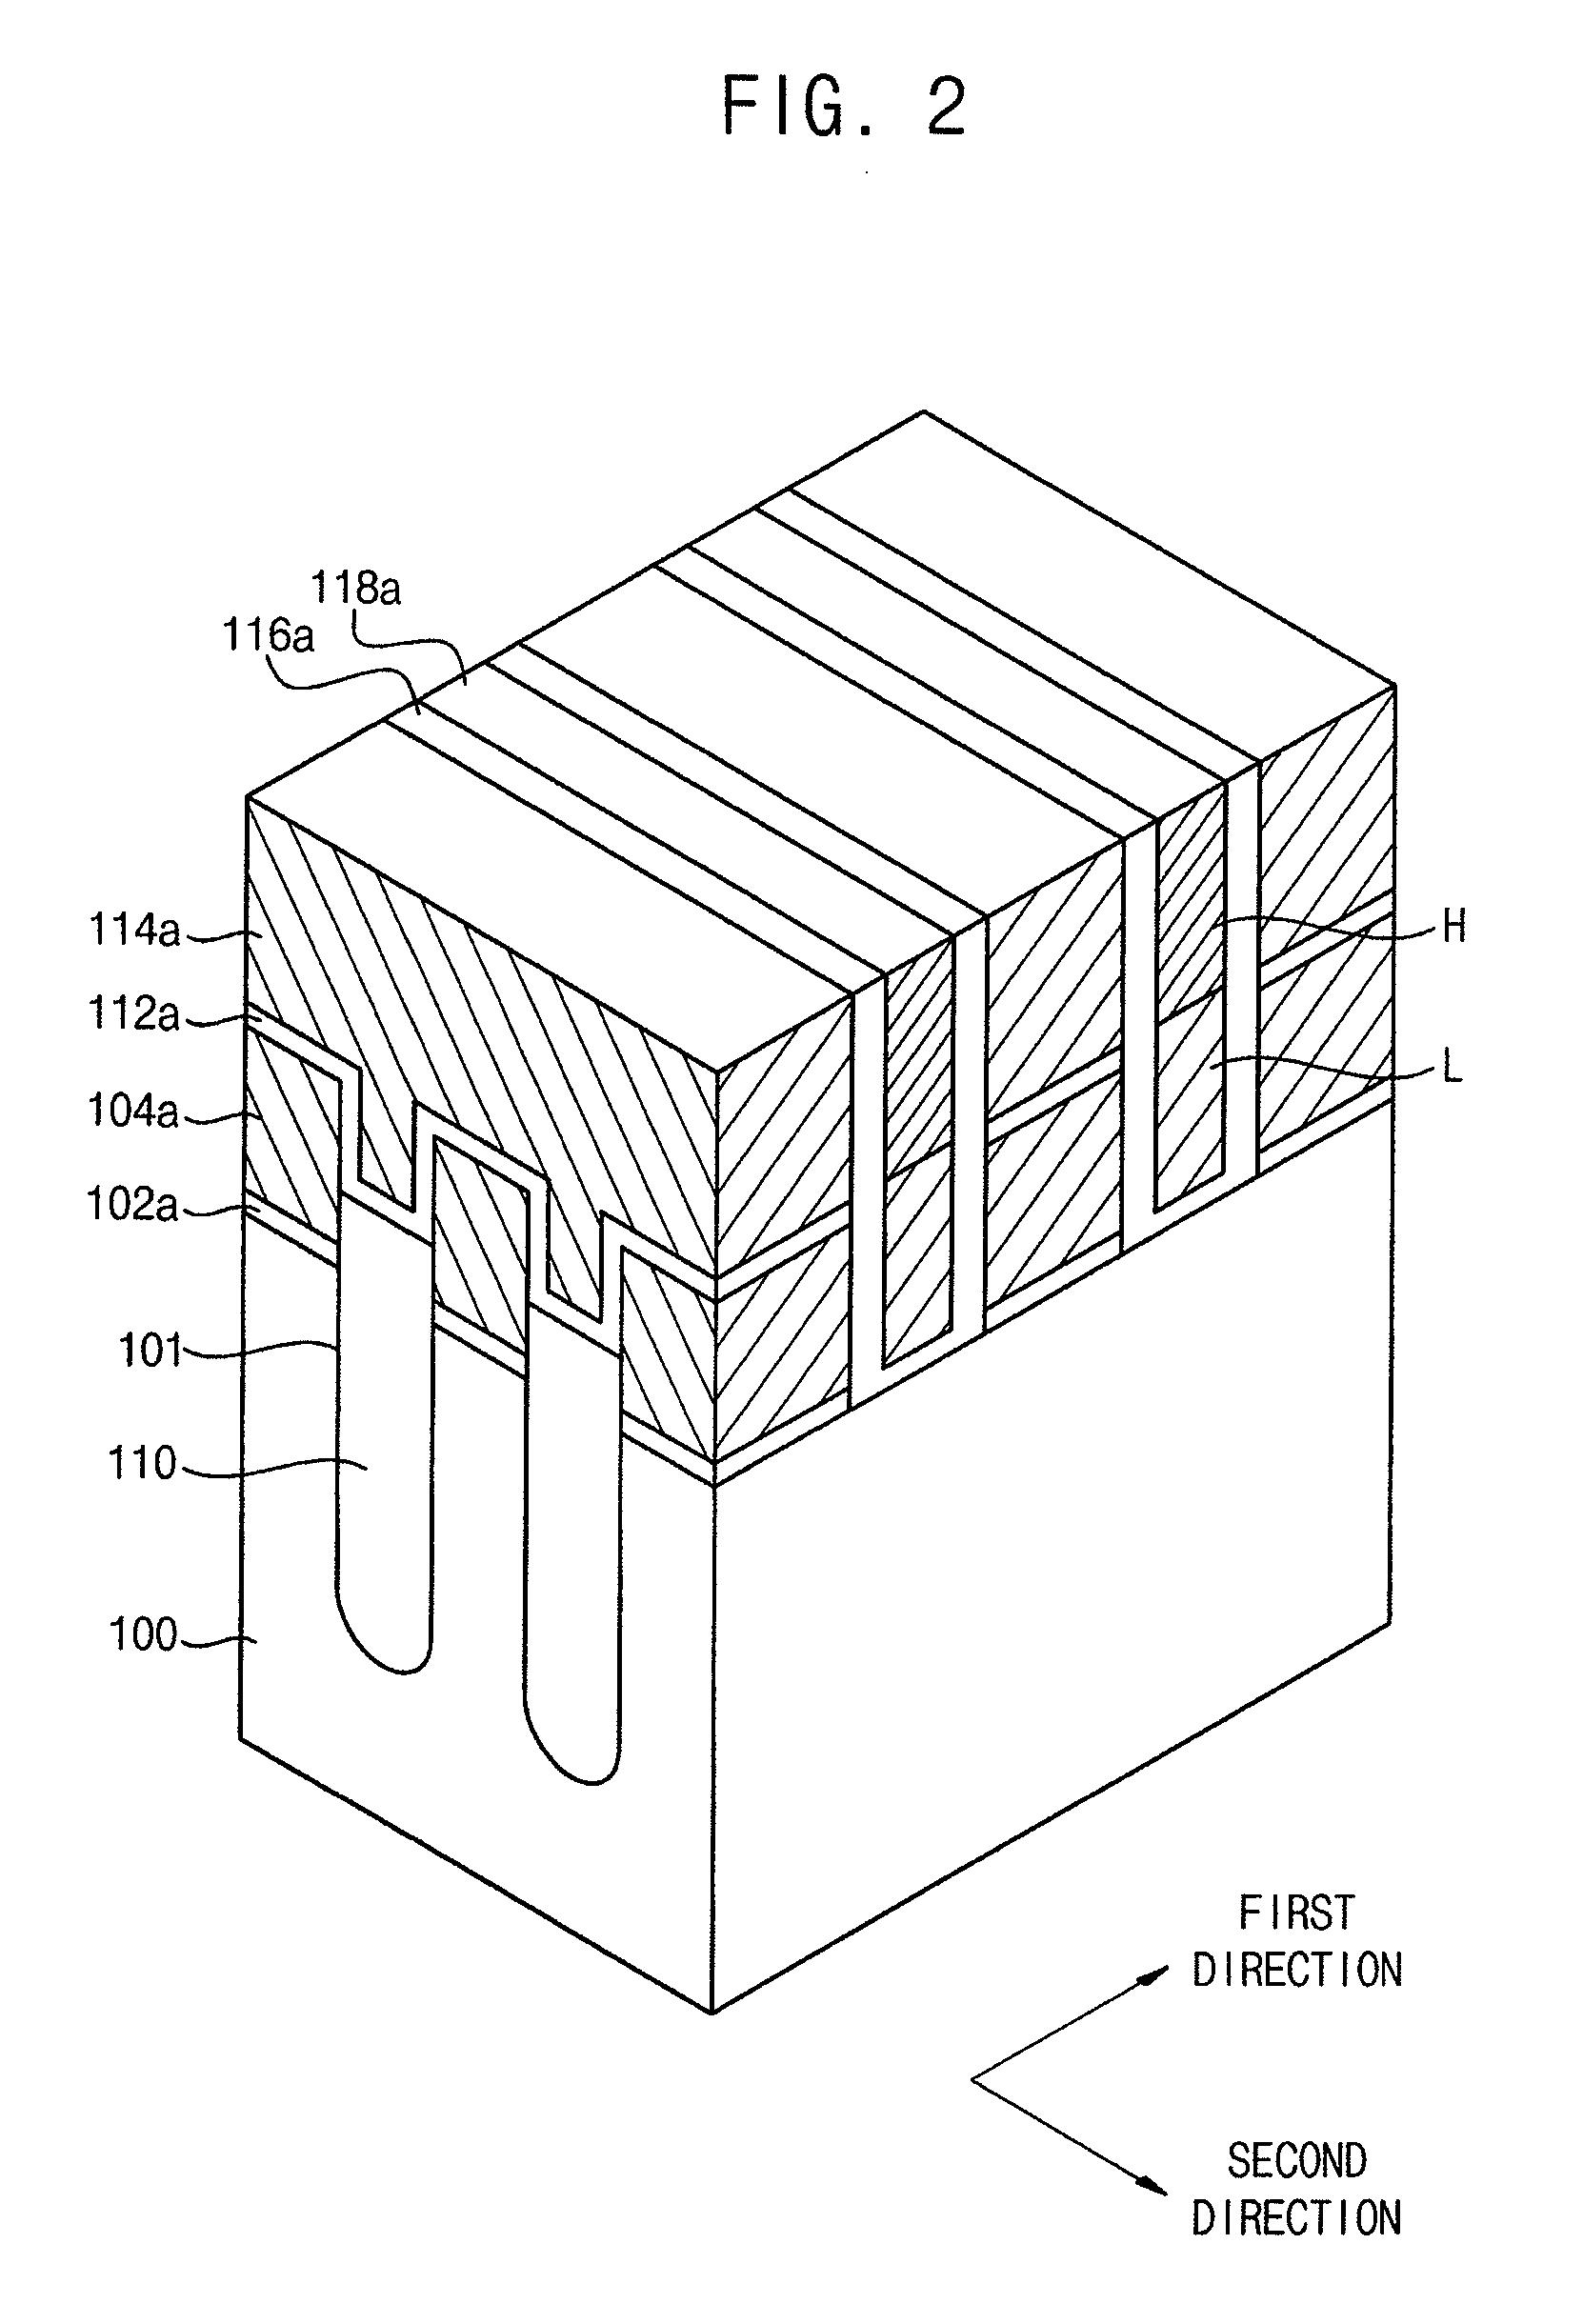 Non-volatile memory devices and methods of manufacturing the same